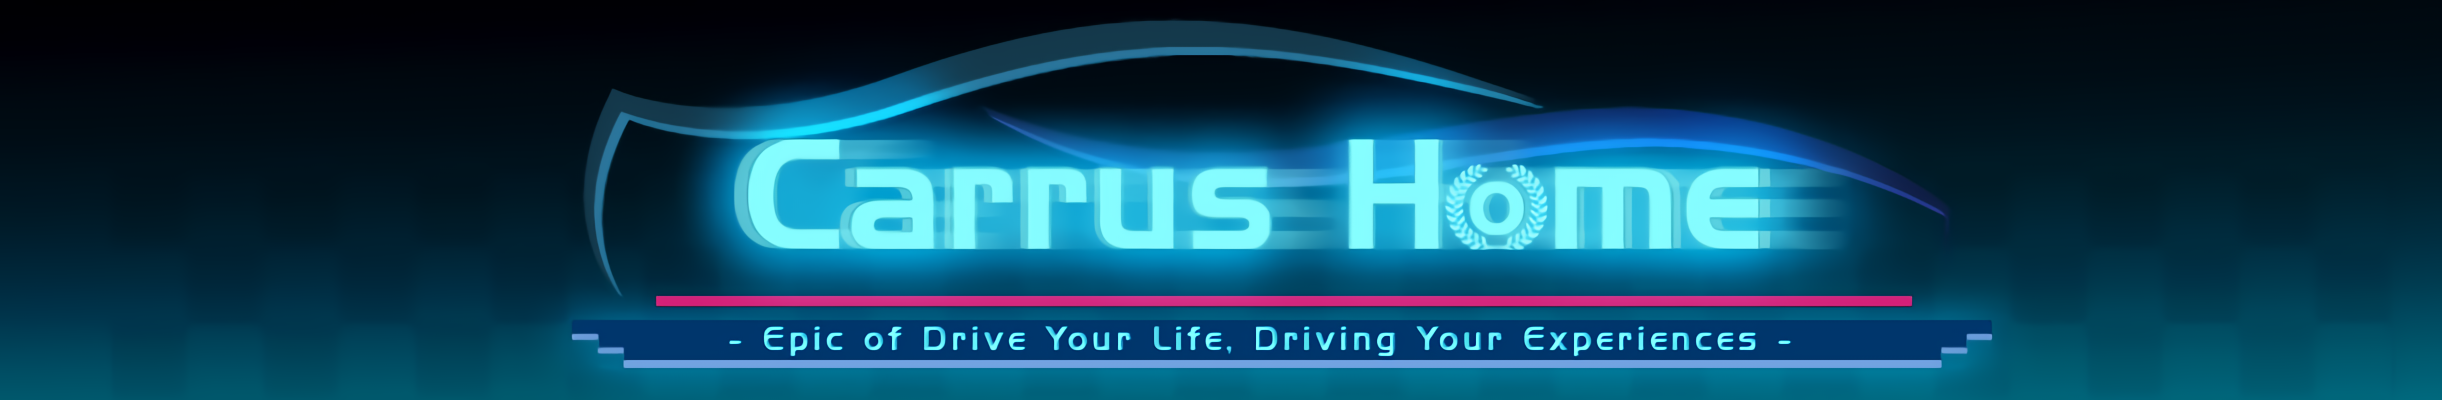 Carrushome.com : Epic of Drive Your Life, Driving Your Experiences